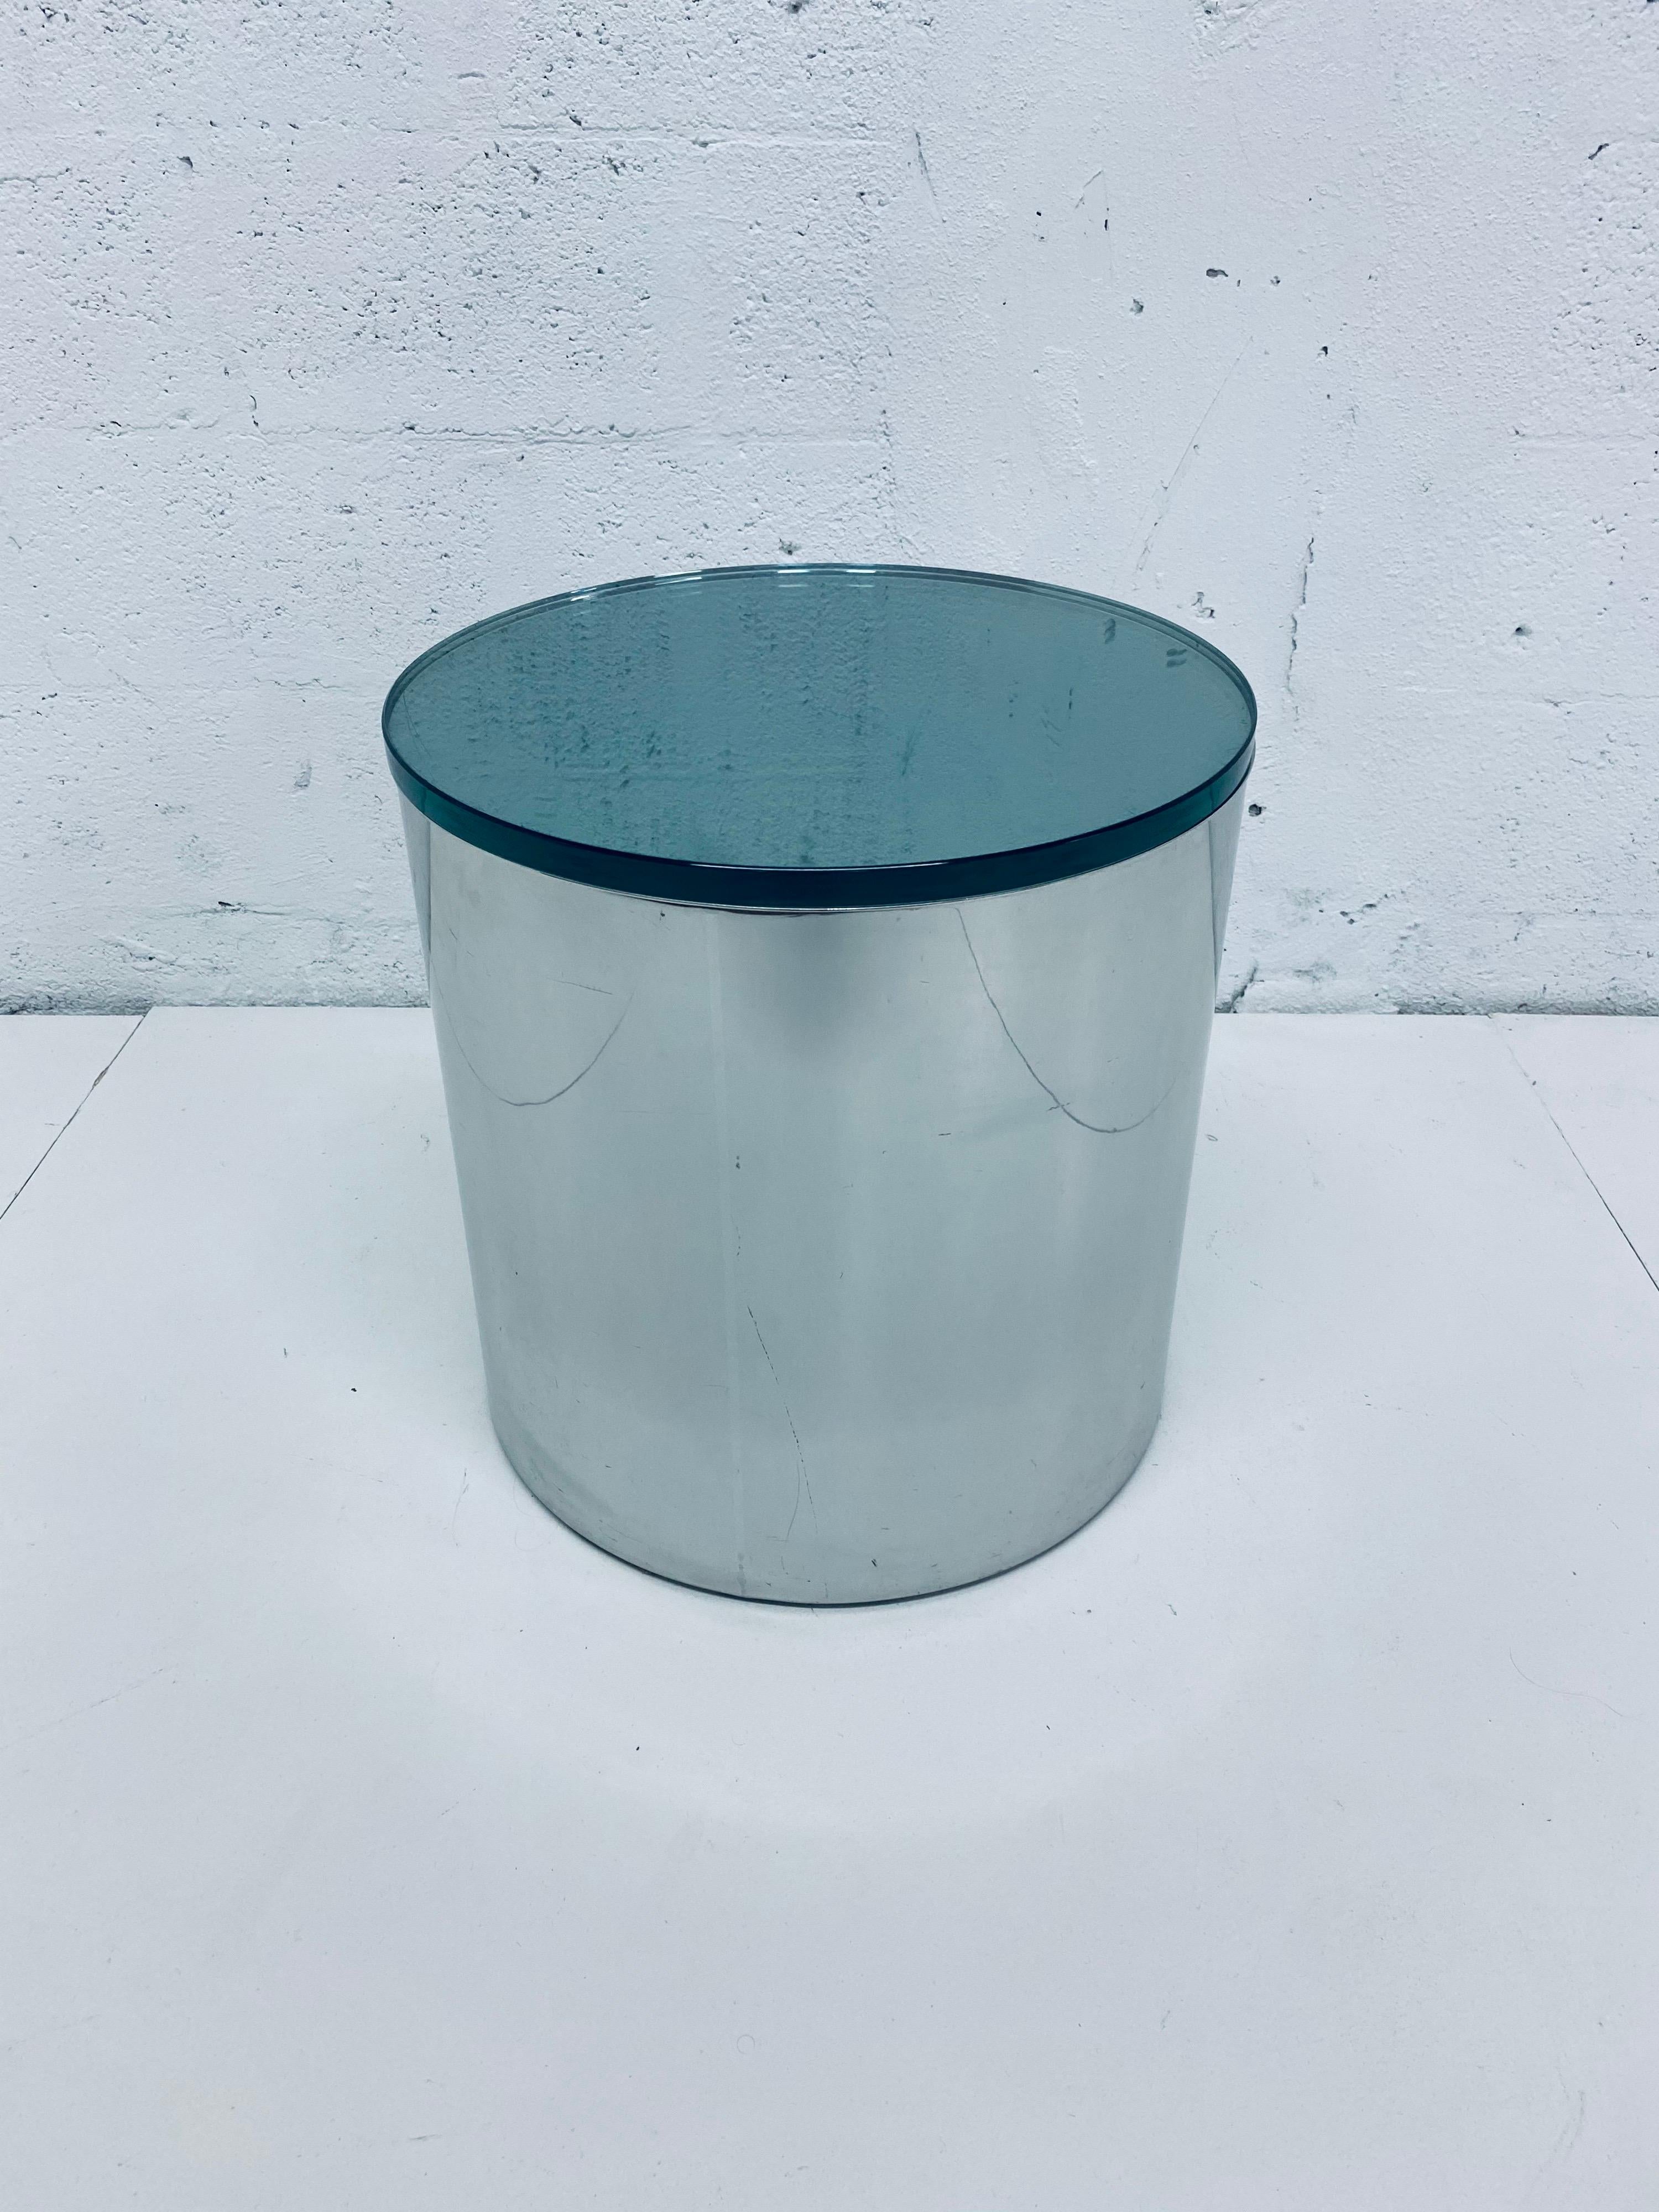 Paul Mayen Polished Steel and Glass Side Table for Habitat, 1970s 10